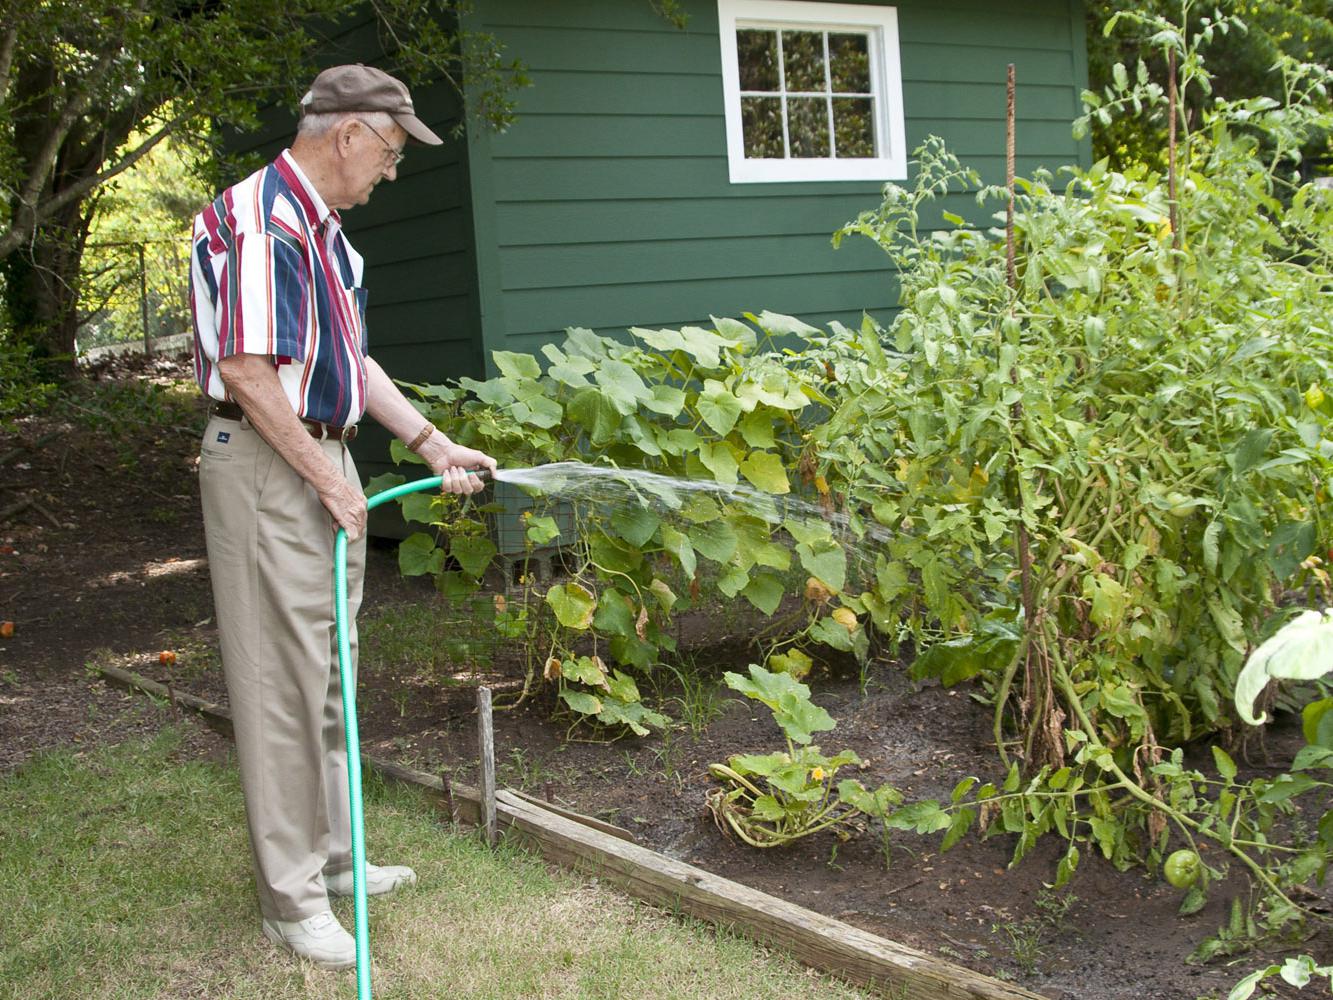 Harold Rone of Starkville uses a hose to water his garden when rainfall is not adequate. If the idea of a hose doesn't appeal to you, consider installing an irrigation system. (Photo by Scott Corey)